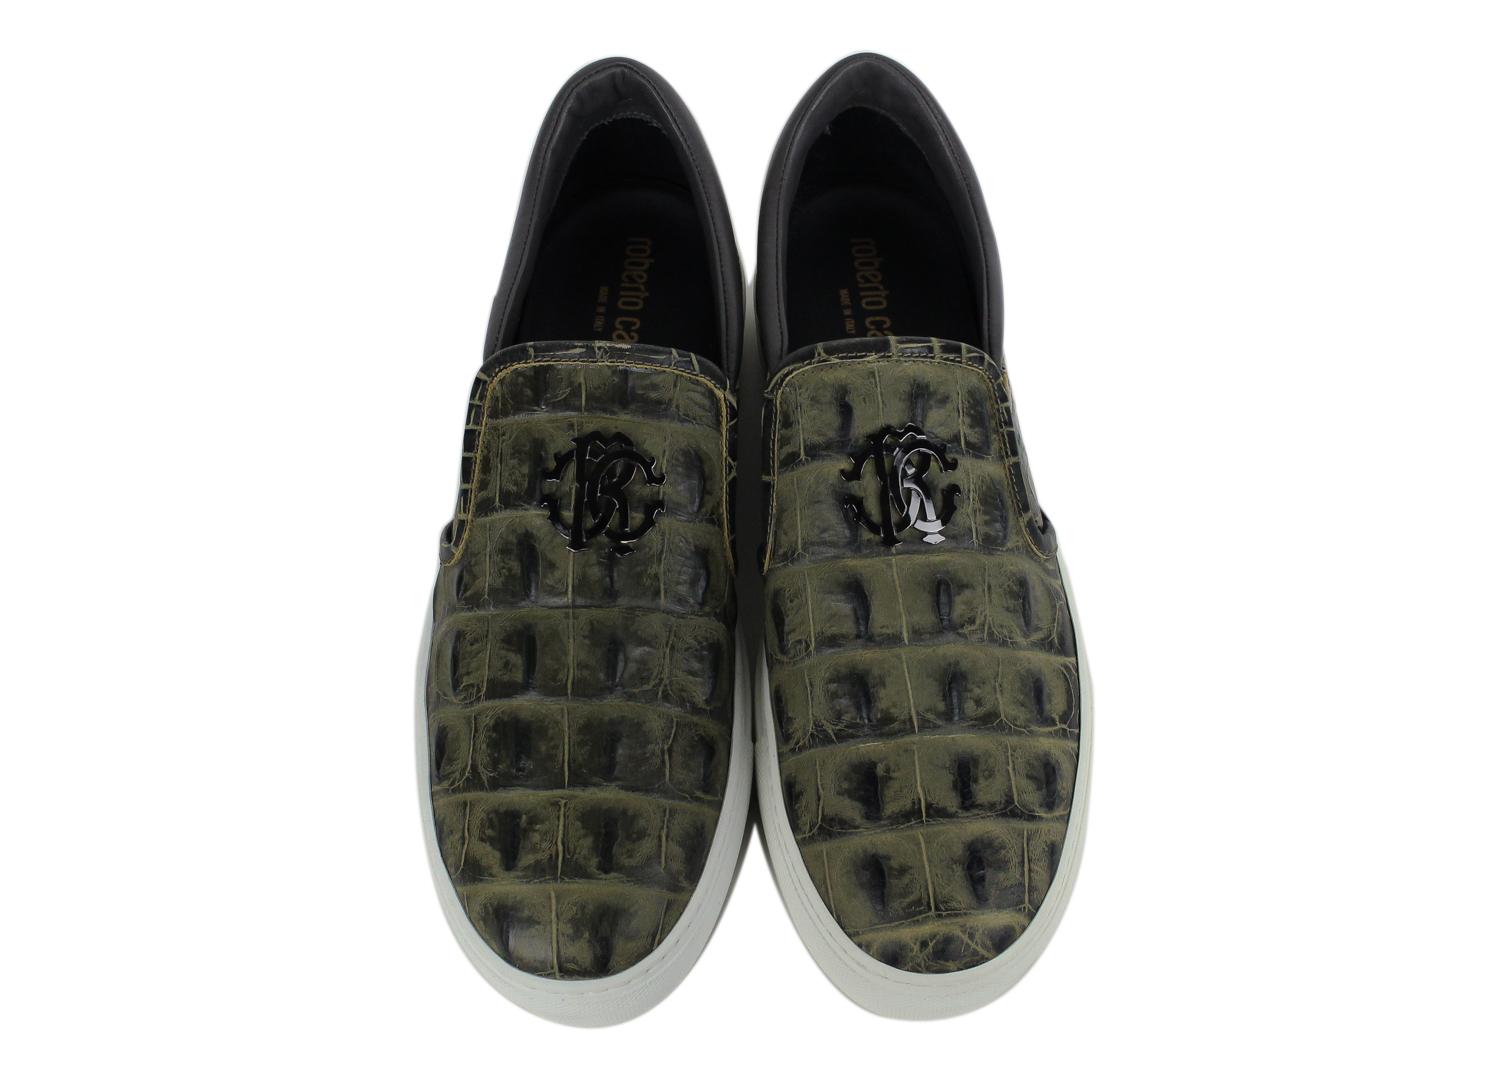 Roberto Cavalli Olive Green Croc Embossed Leather Slip Ons. These slip ons feature a croc embossed textured leather silhouette and a silver toned metal signature Roberto Cavalli Logo. Pair with light wash jeans and a white v neck.



100%